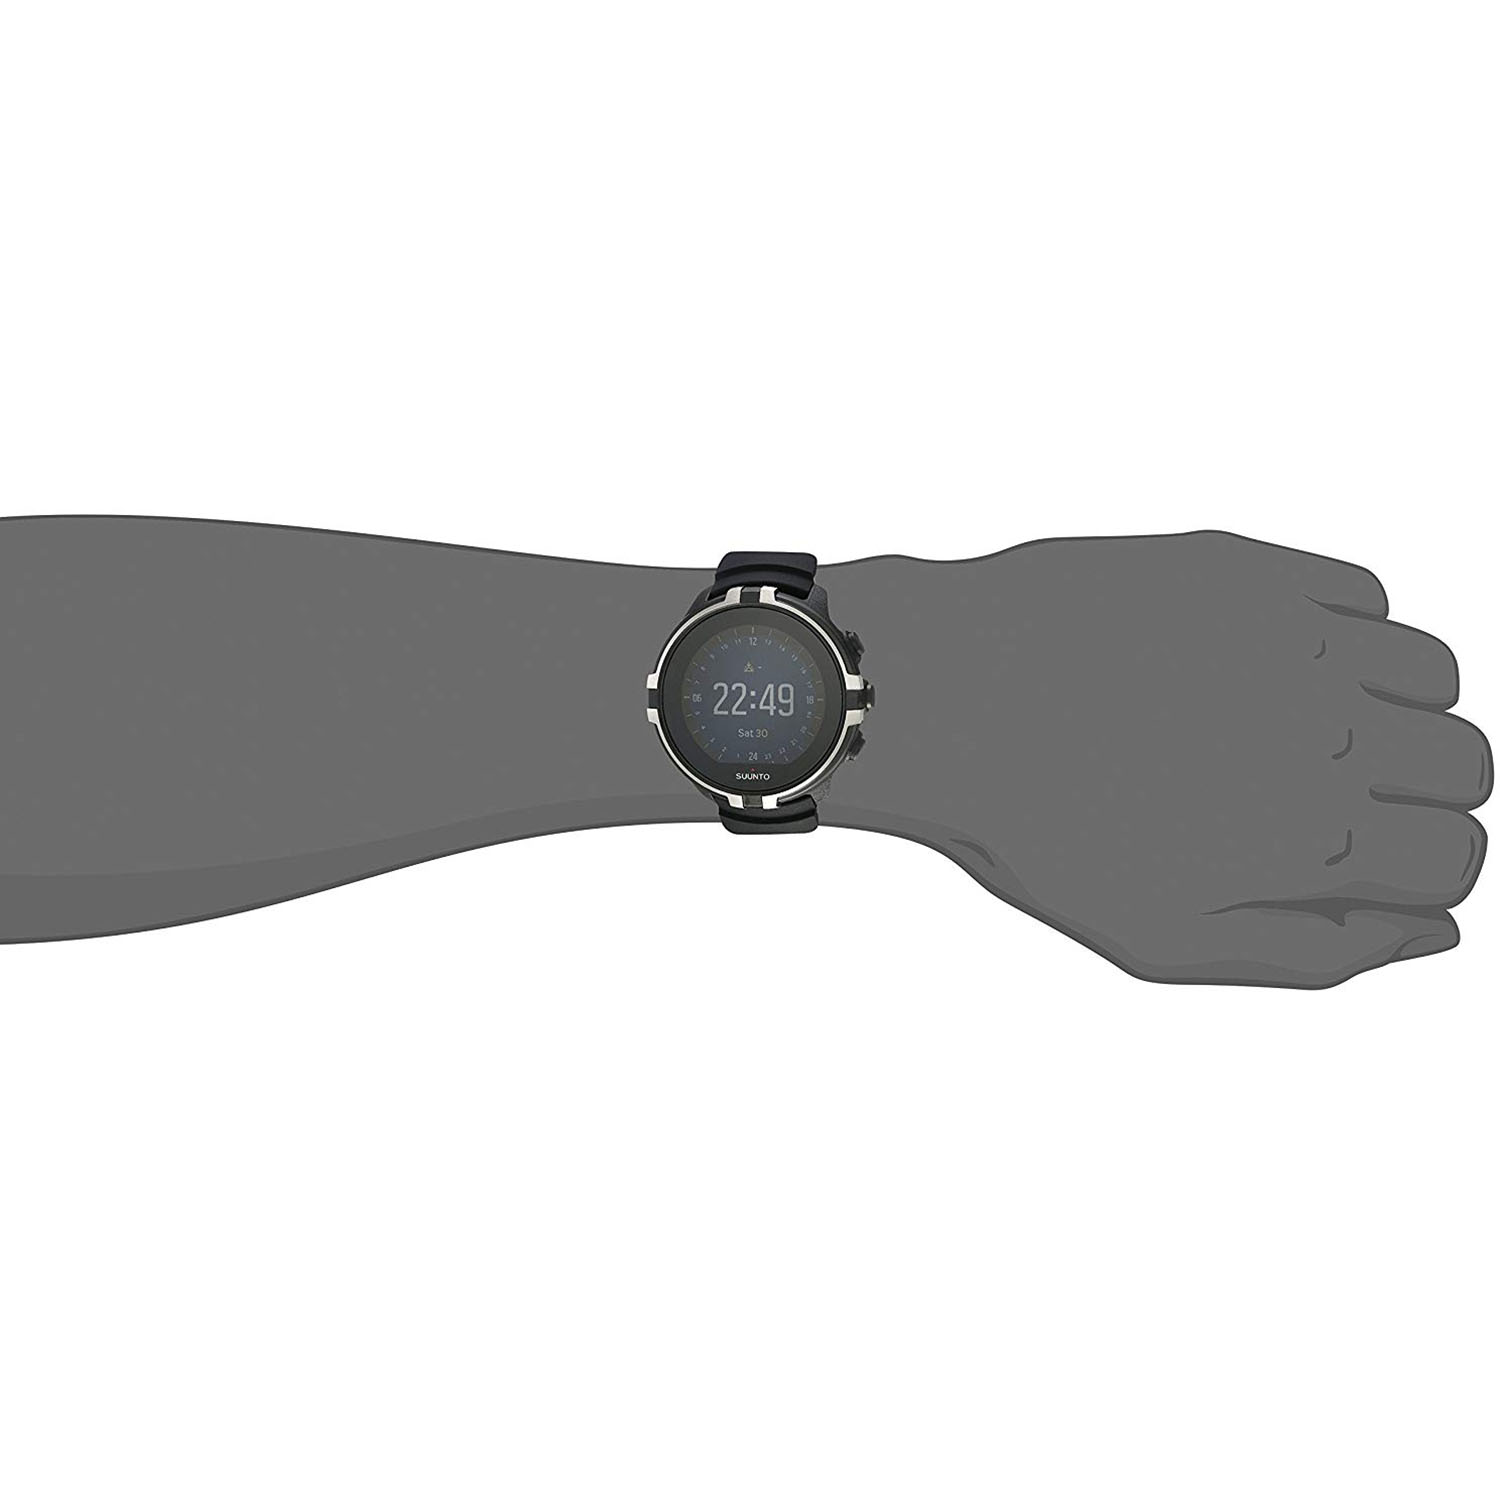 Spartan Sport Wrist HR and Barometer Watch, Black/Silver - image 4 of 6